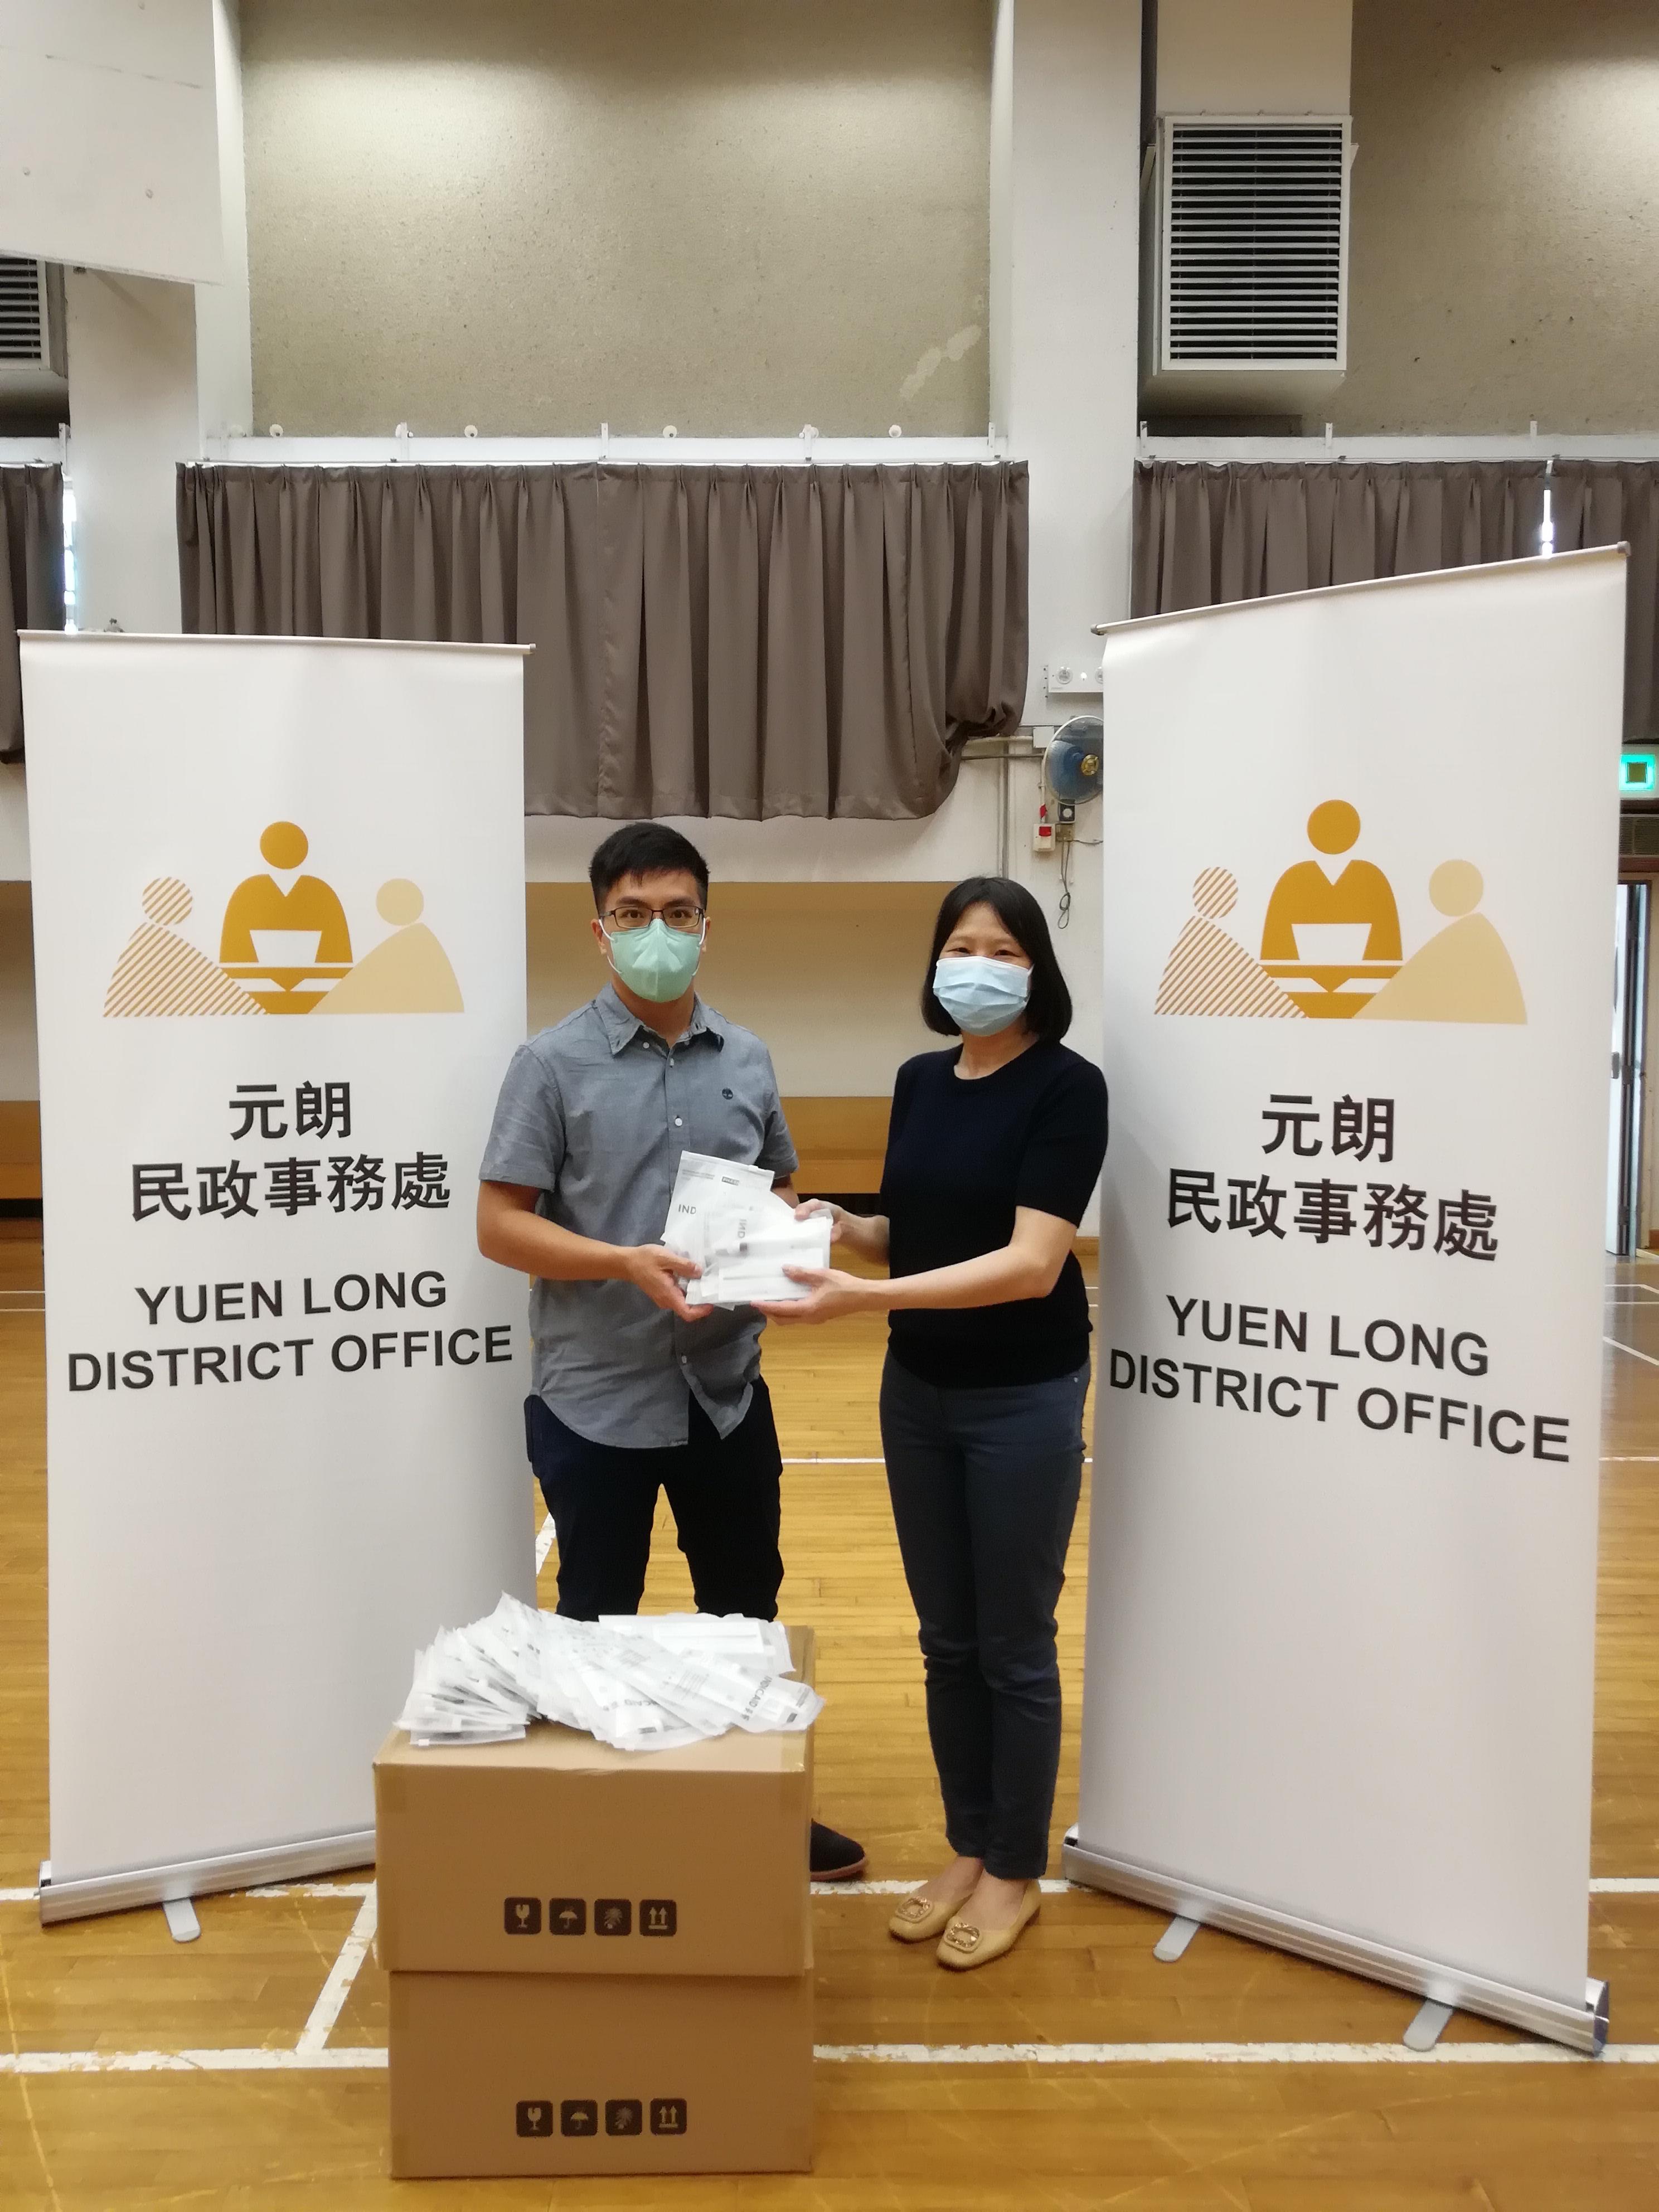 The Yuen Long District Office today (March 15) distributed COVID-19 rapid test kits to households, cleansing workers and property management staff living and working in Tin Yuet Estate for voluntary testing through the Housing Department and the property management company.